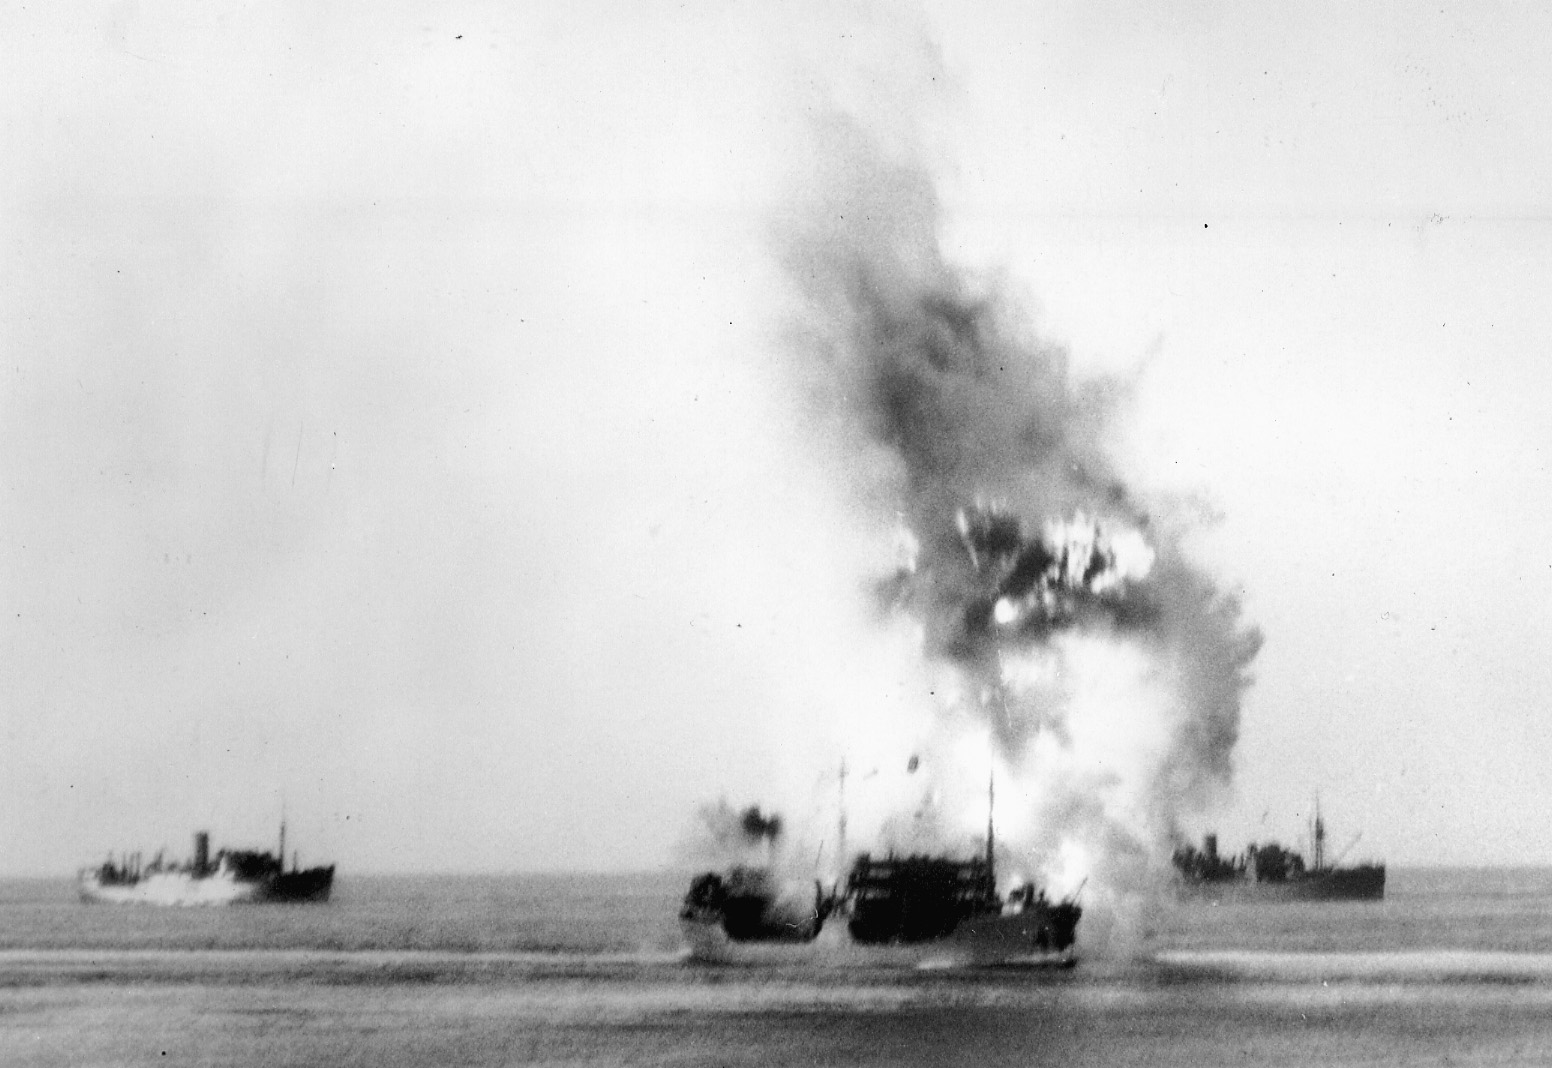 The merchant ship Ohio is struck portside by a torpedo from an Italian submarine during Operation Pedestal.